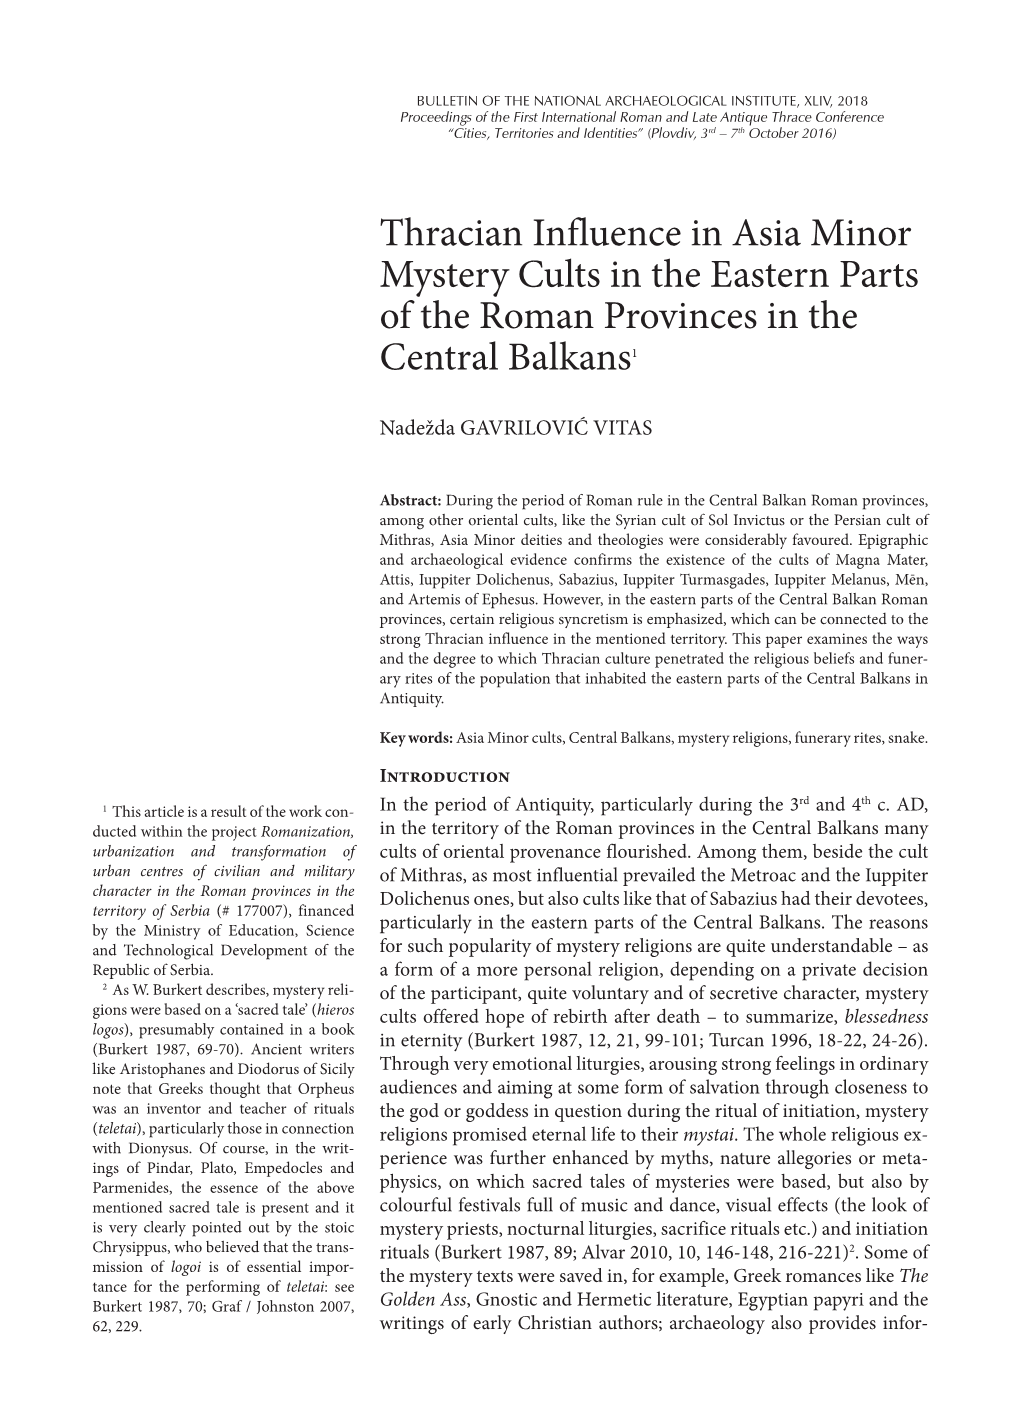 Thracian Influence in Asia Minor Mystery Cults in the Eastern Parts of the Roman Provinces in the Central Balkans1